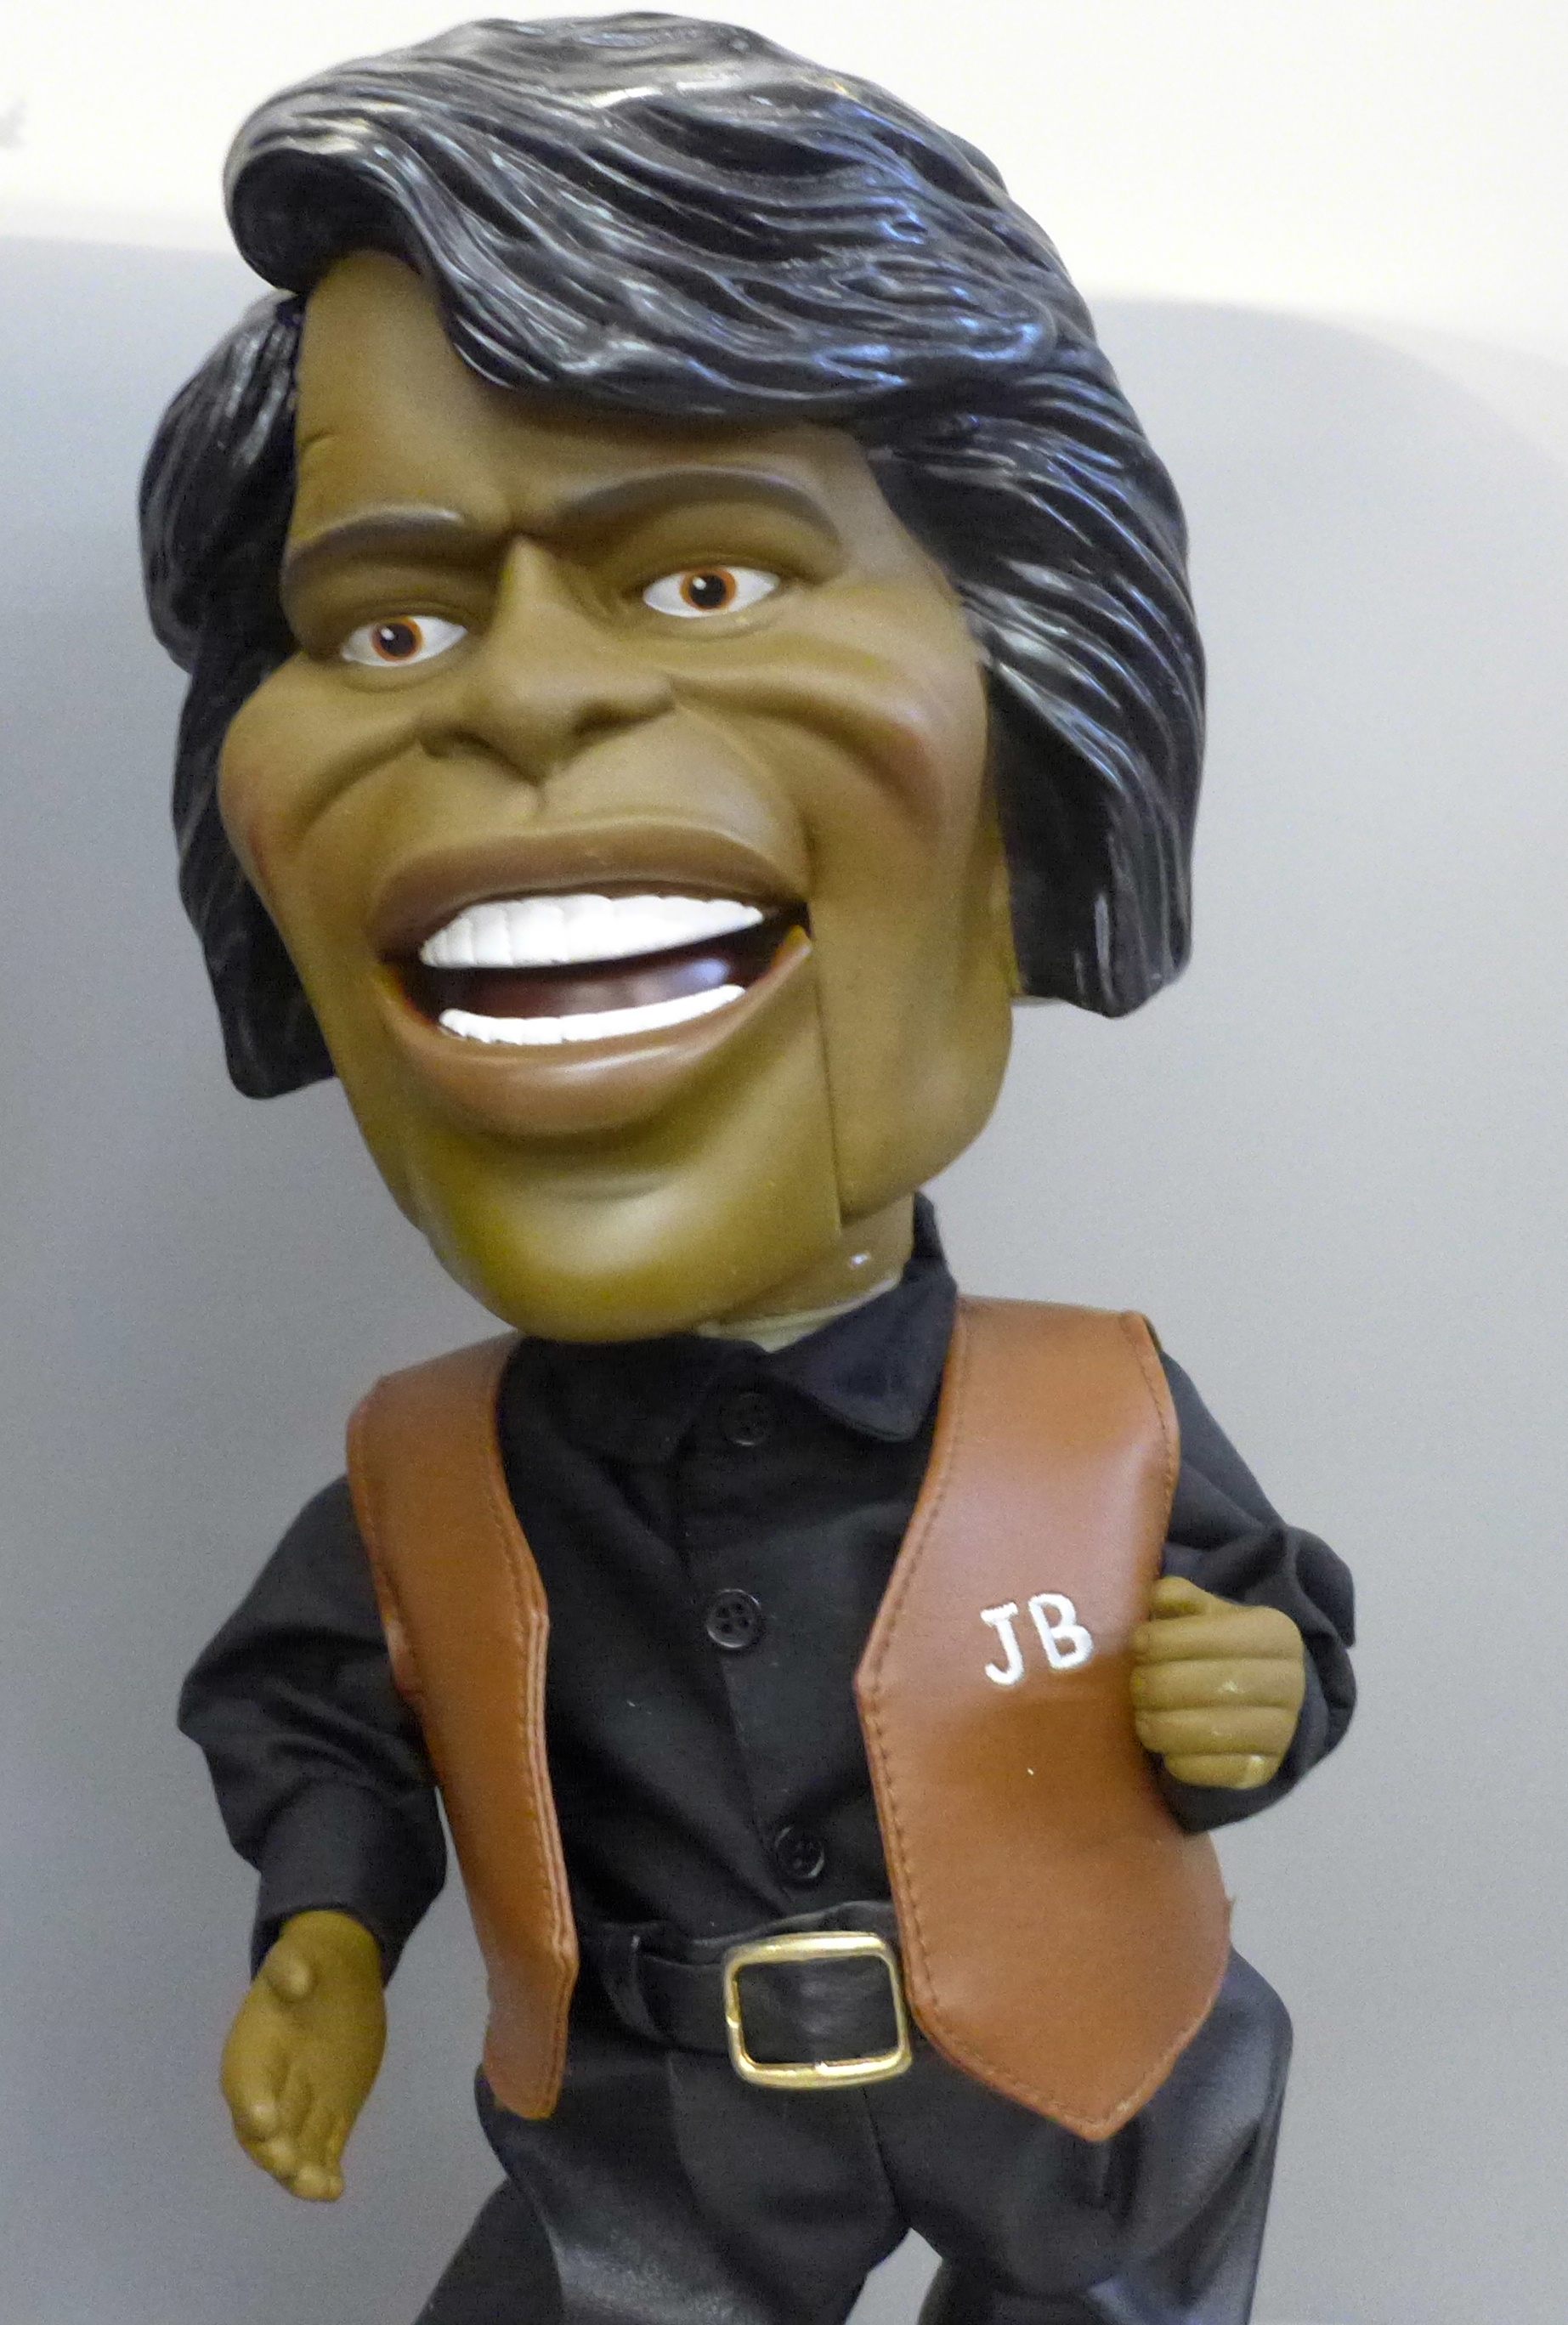 James Brown, Dancin' Shoutin', The Godfather of Soul large model, boxed - Image 2 of 4